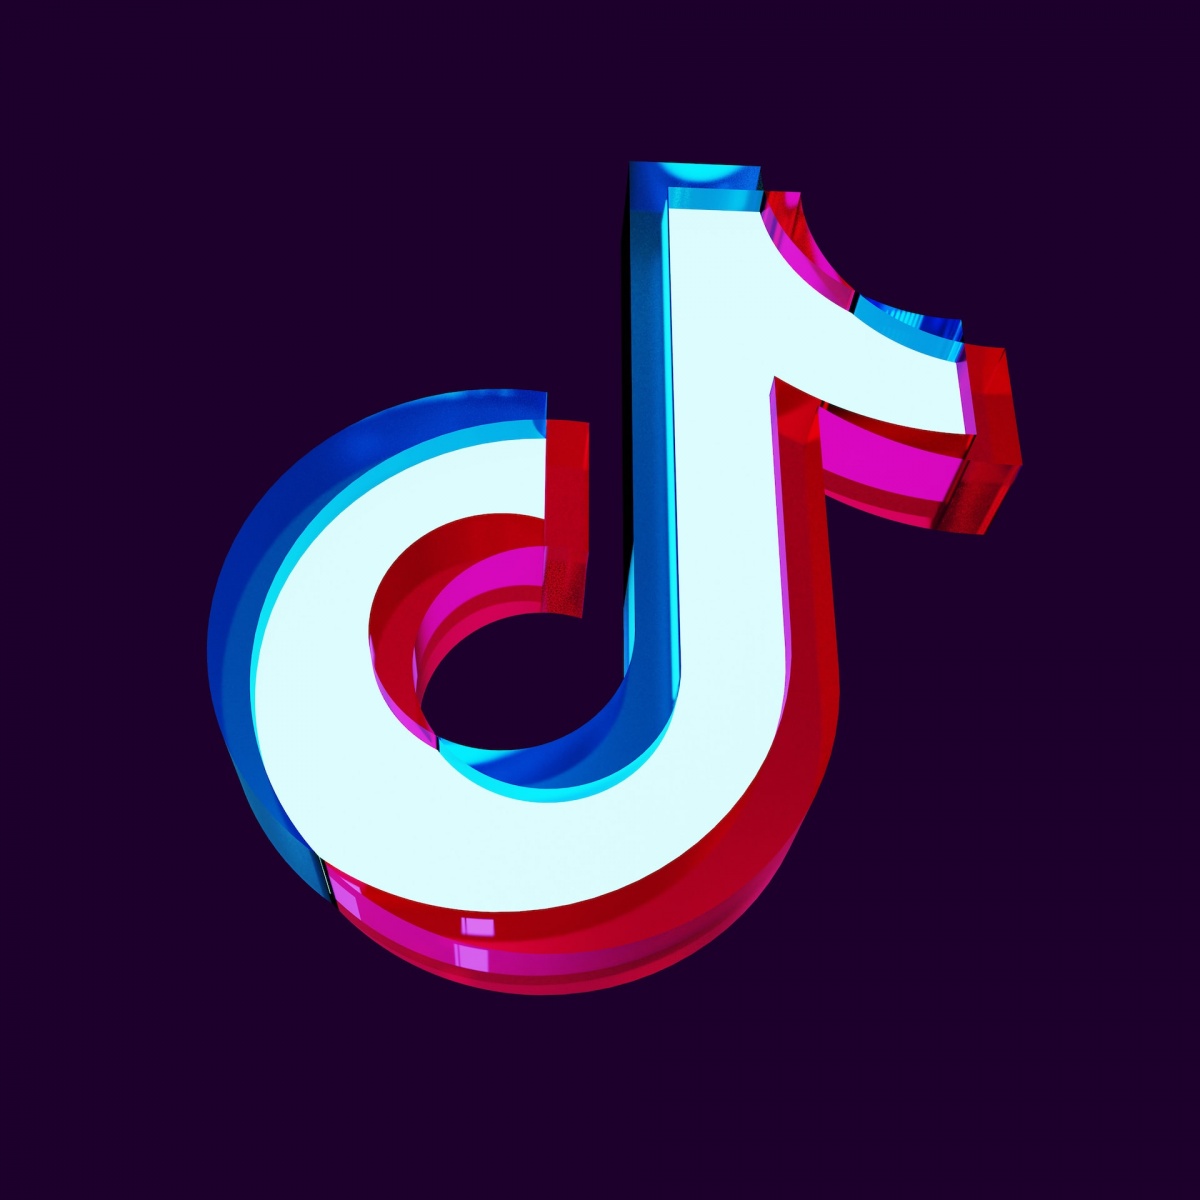 TikTok 'For You' Feed Reduces Repetitive Patterns to Avoid Harmful Content